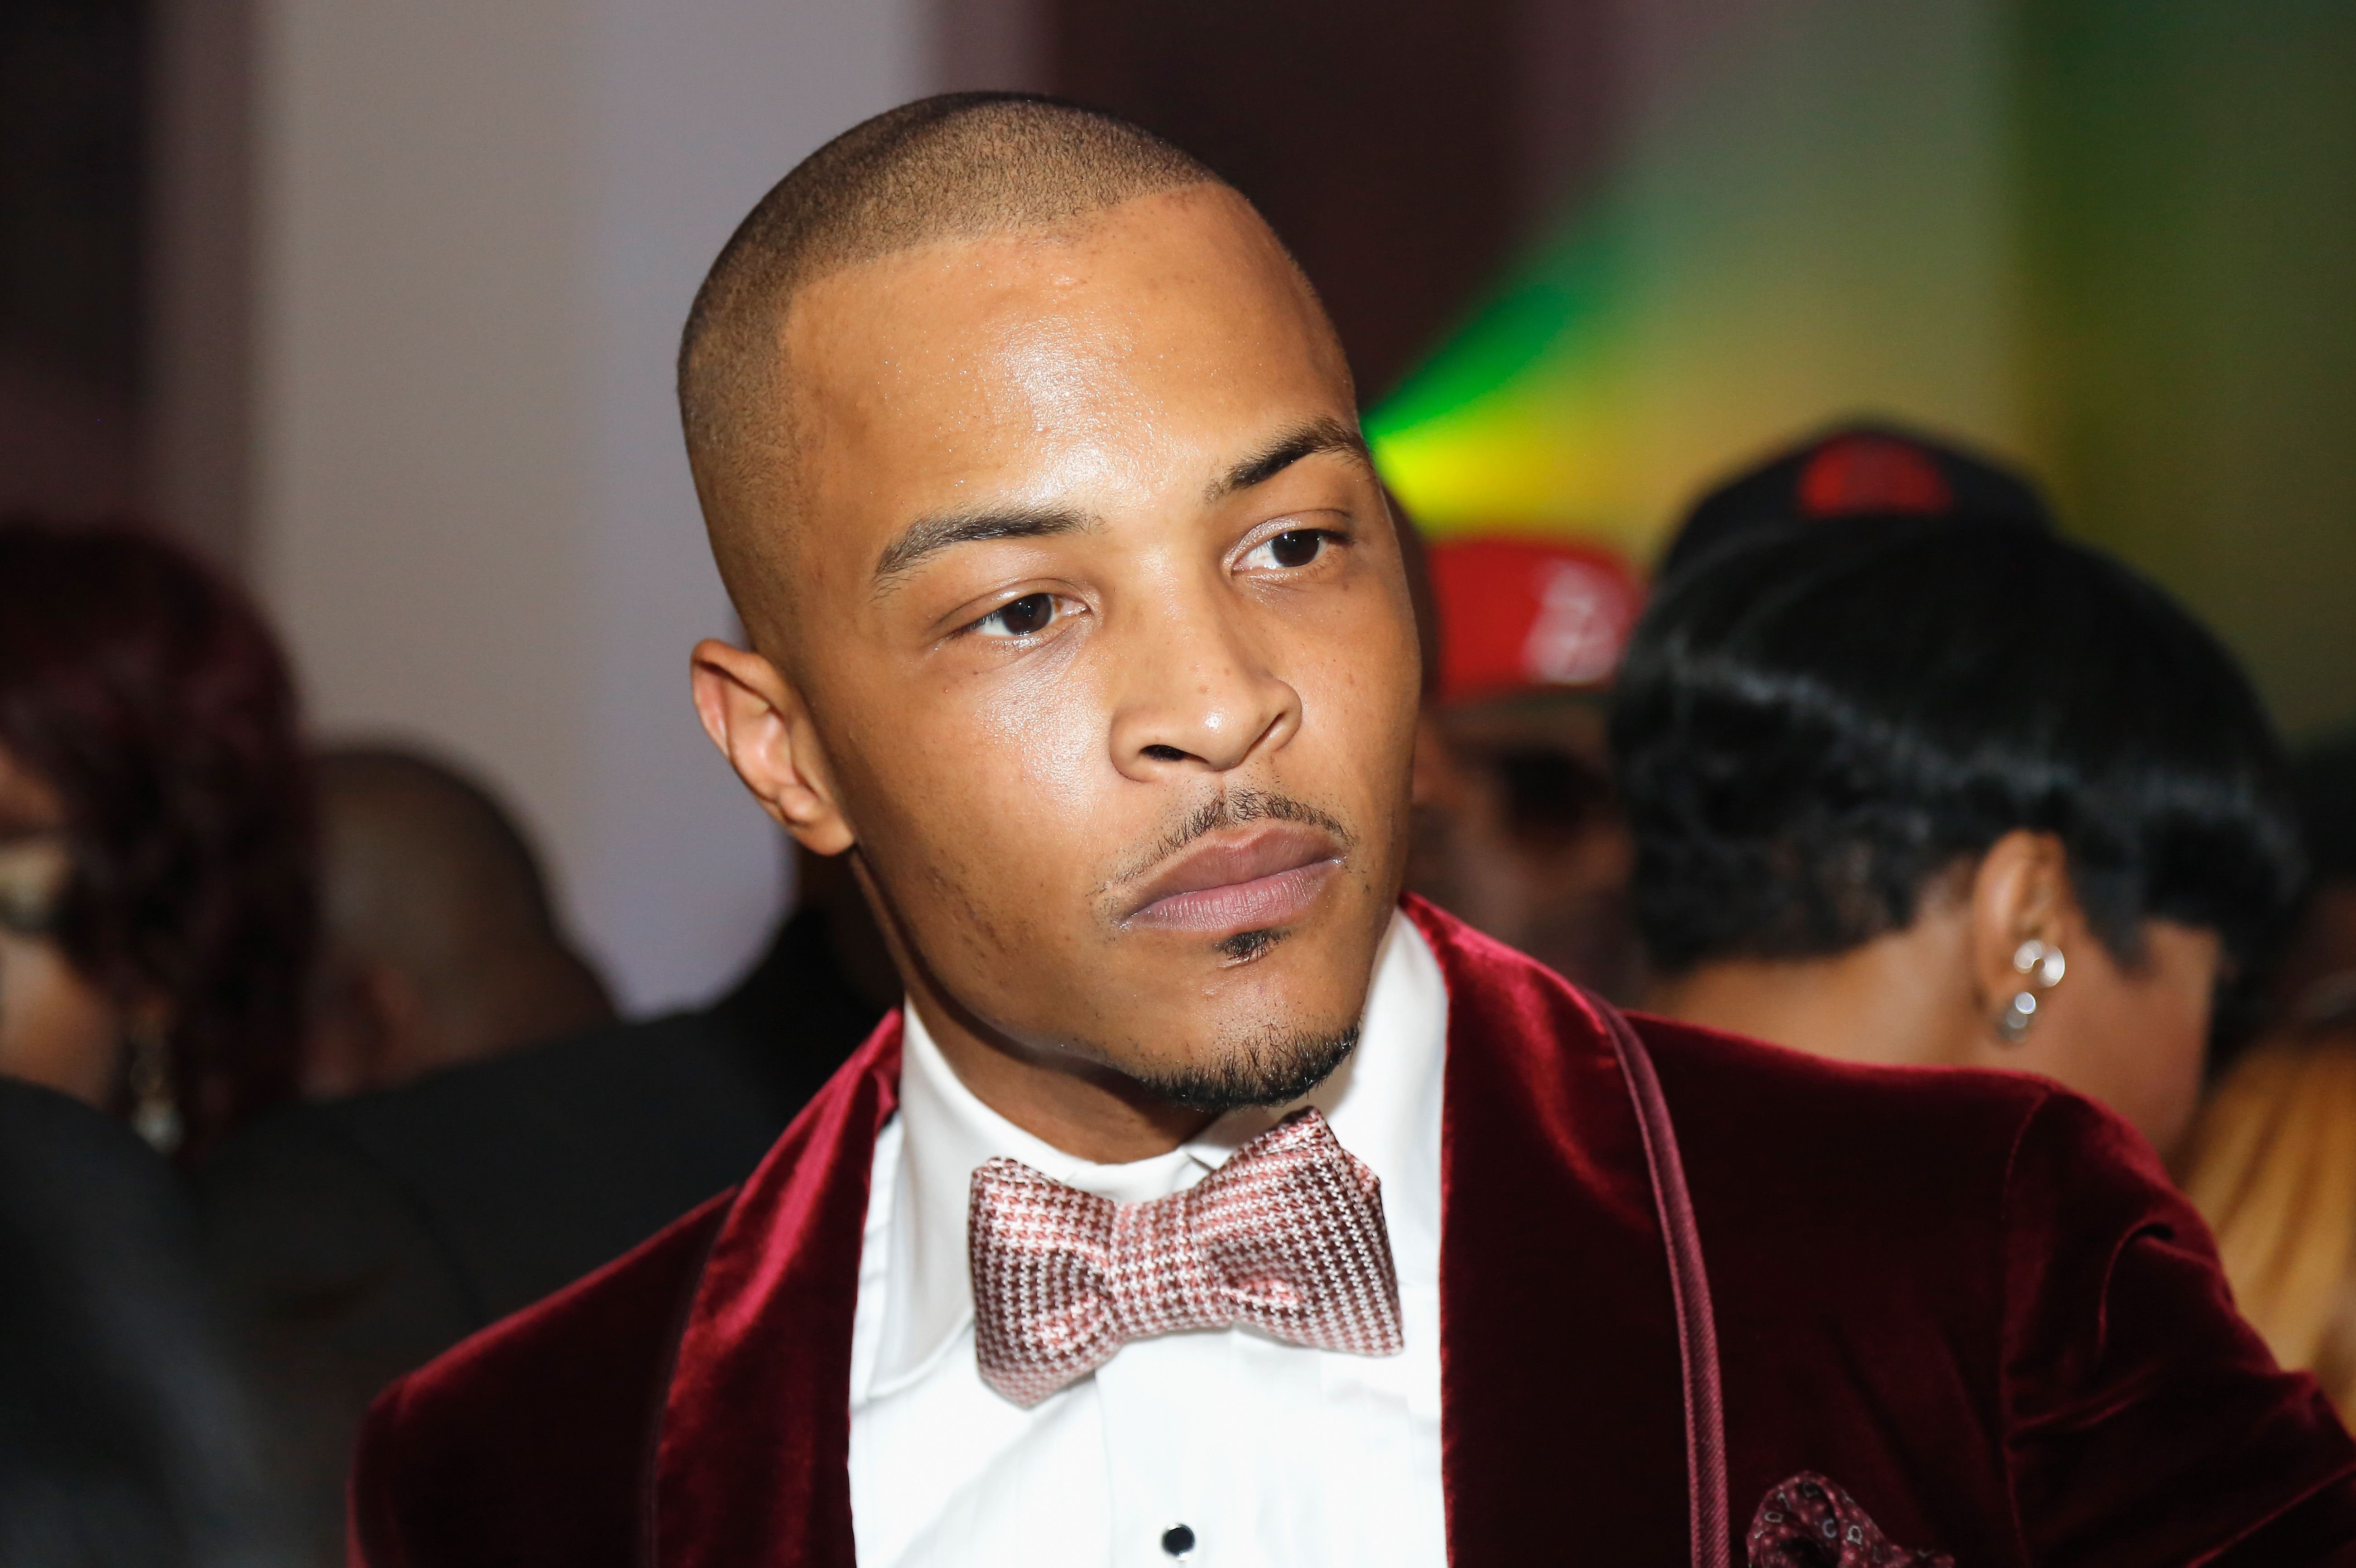 TI during his birthday celebration hosted by Grey Goose Vodka on September 28, 2013 in Atlanta, Georgia | Photo: Getty Images  